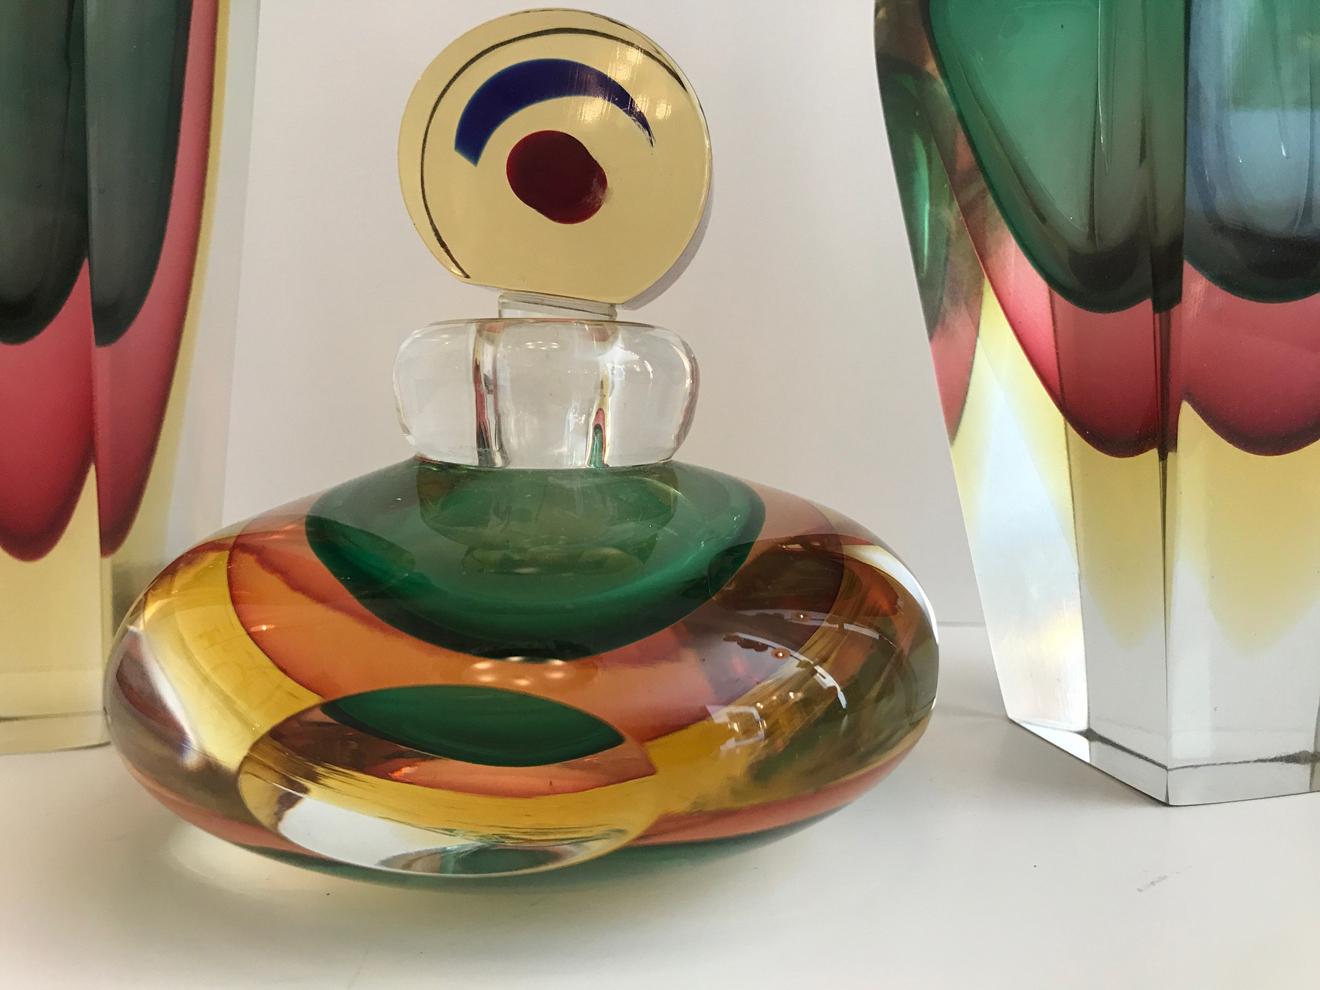 Group of three Murano glass perfume bottles. Very thick glass and great colors.
Measures: 11